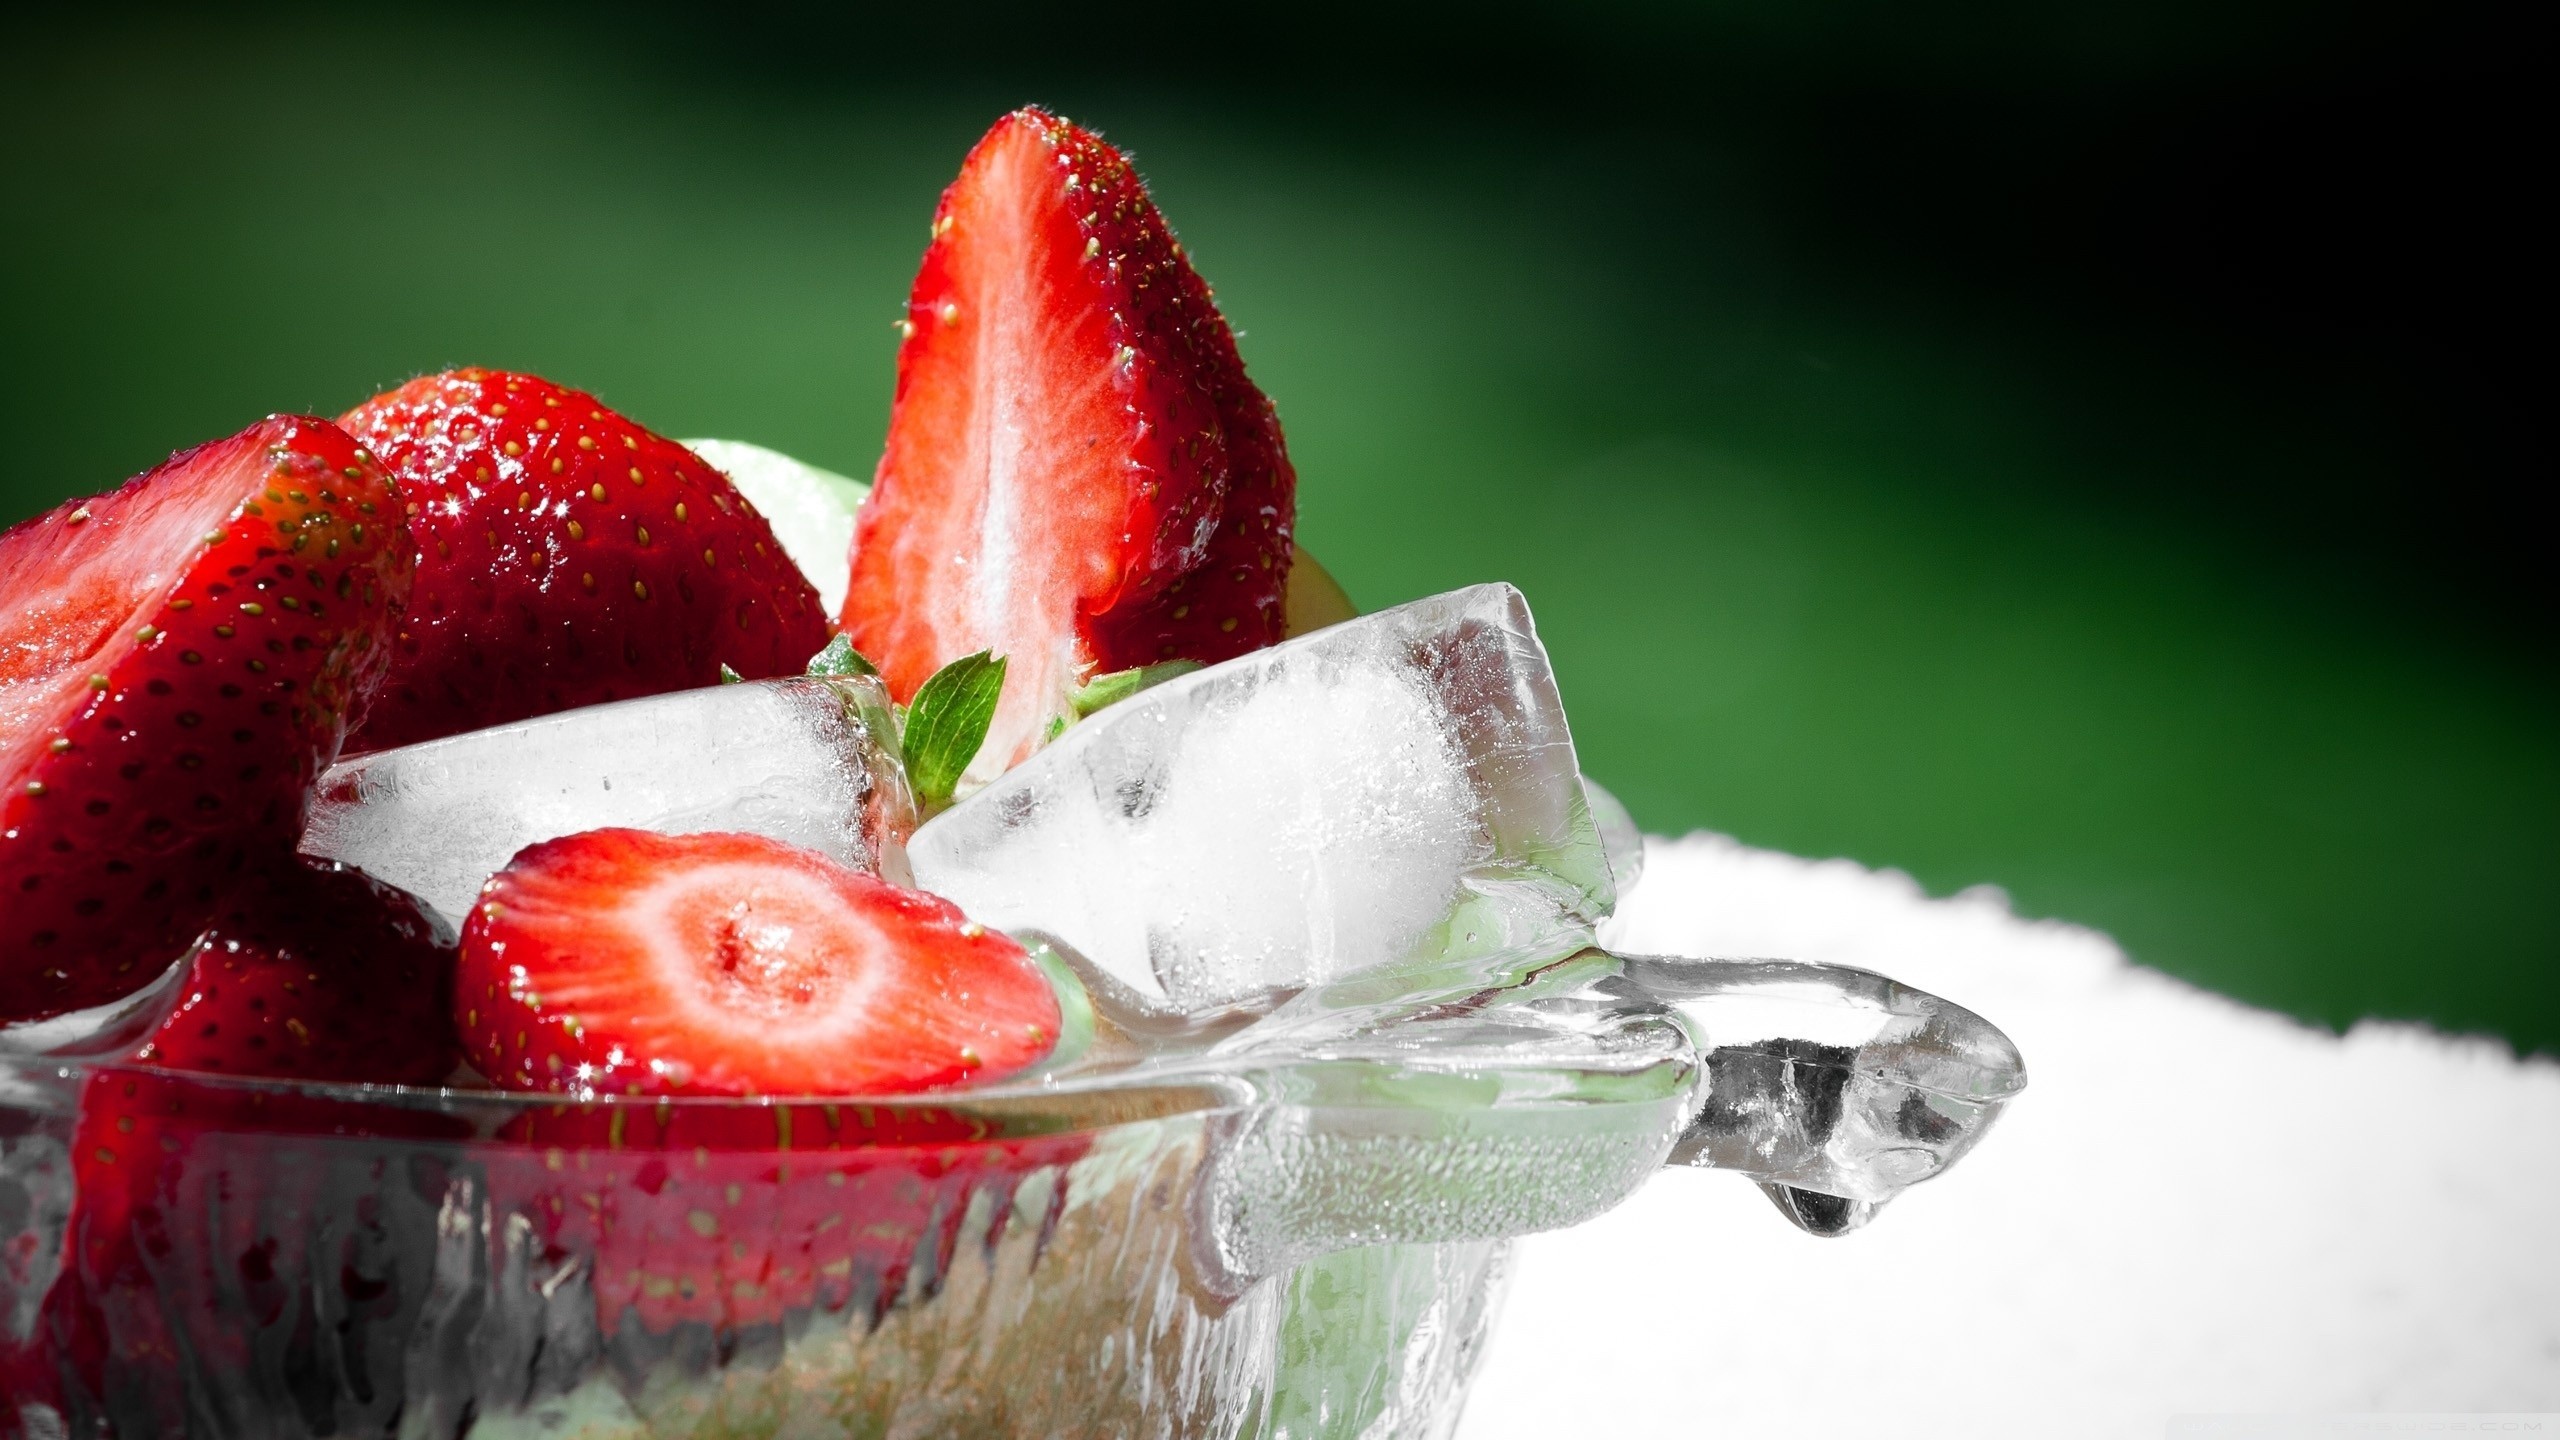 ice, Fruits, Strawberries, Ice, Cubes Wallpaper